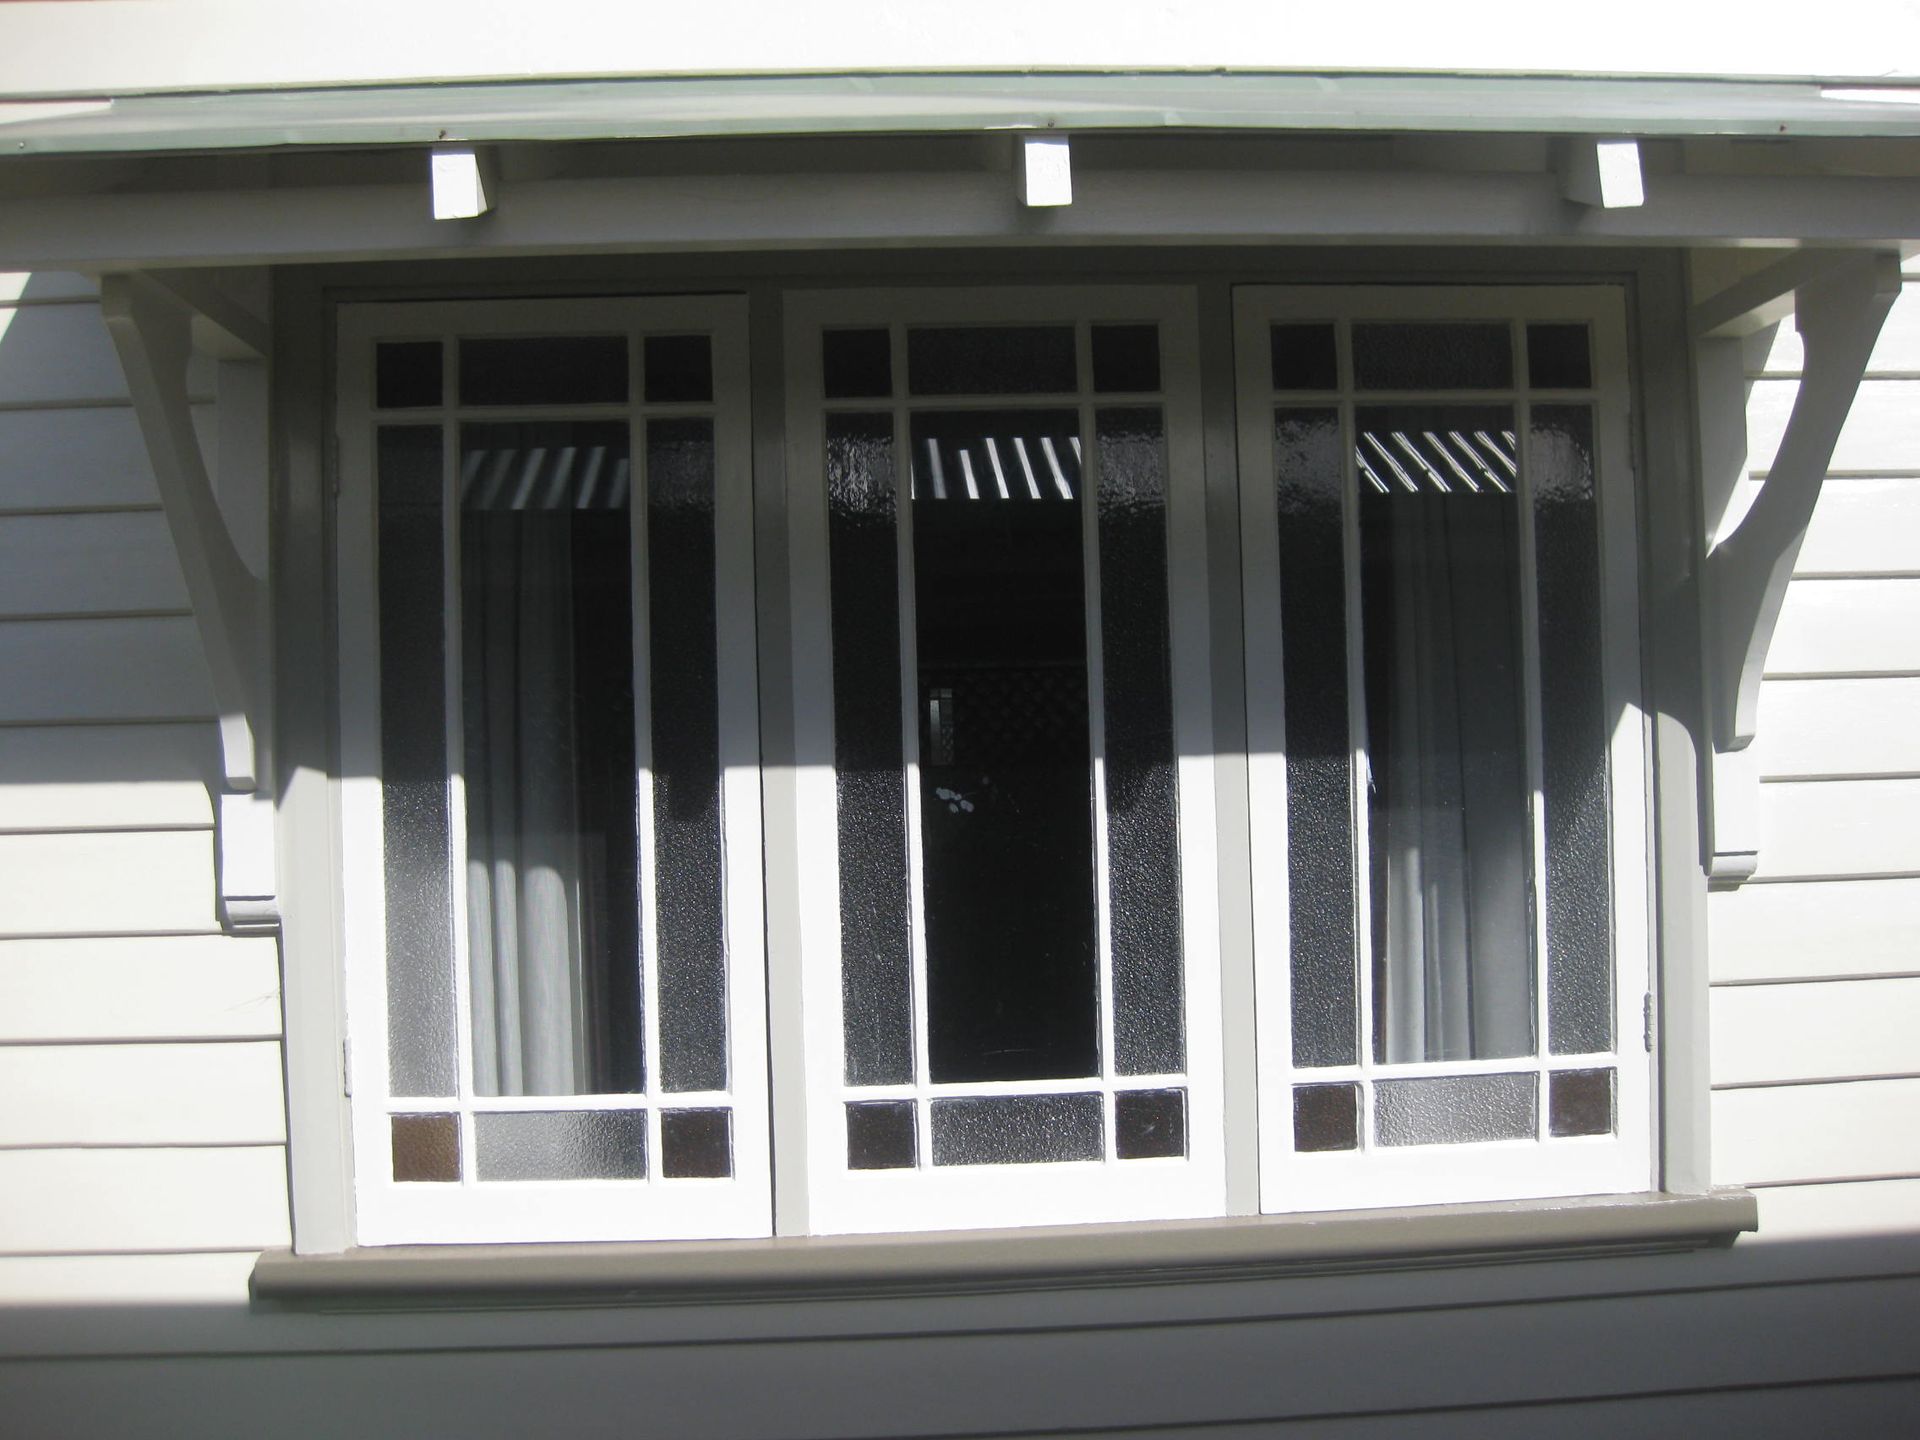 Close up view of three windows with freshly painted trims